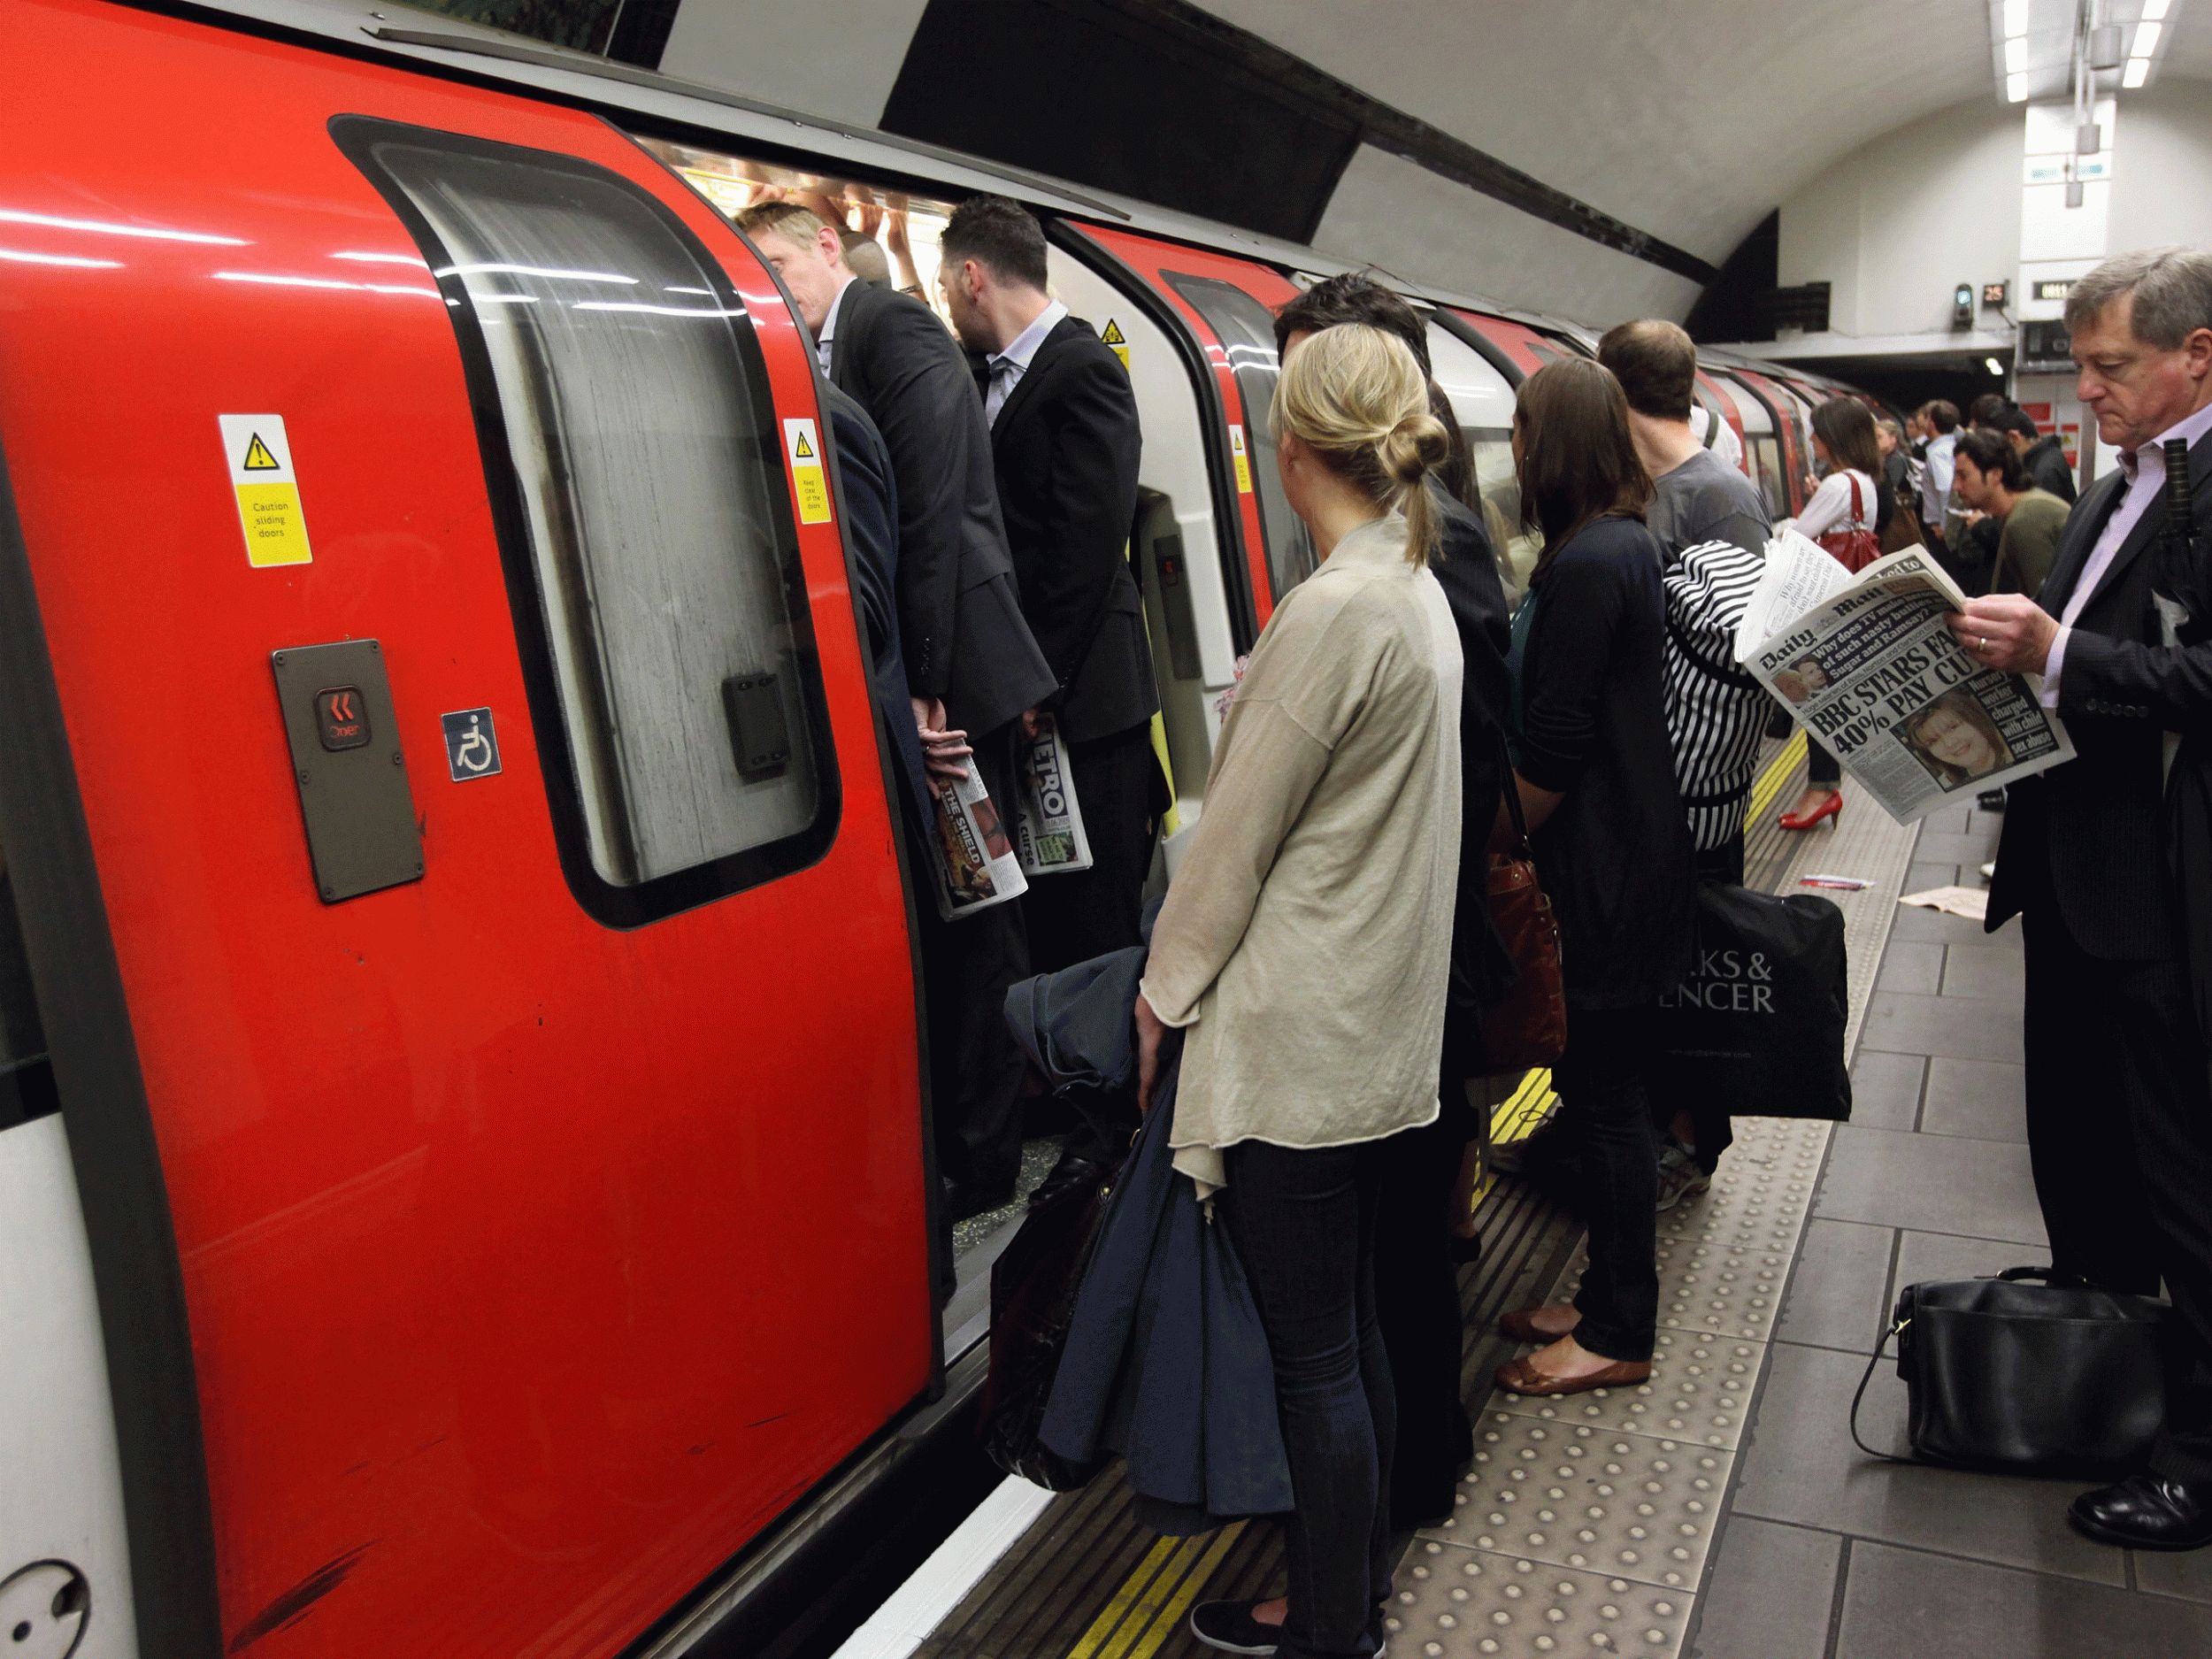 Everything you need to know about the Tube strike